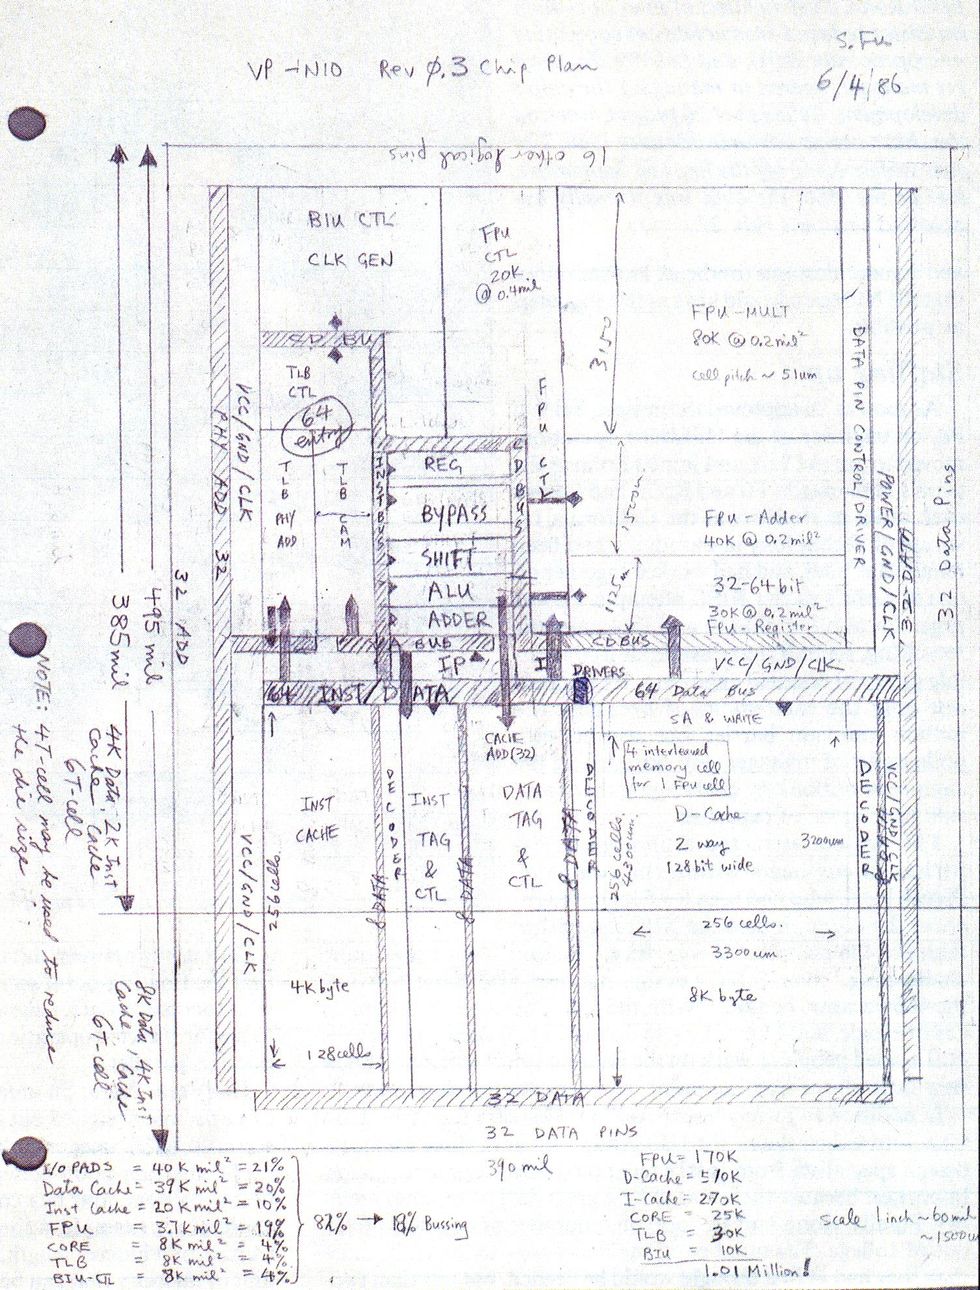 A circuit diagram sketched in pencil on paper, handwritten notes identify FPU-Adder, 32-64bit, INST CACHE, D-Cache, and other features